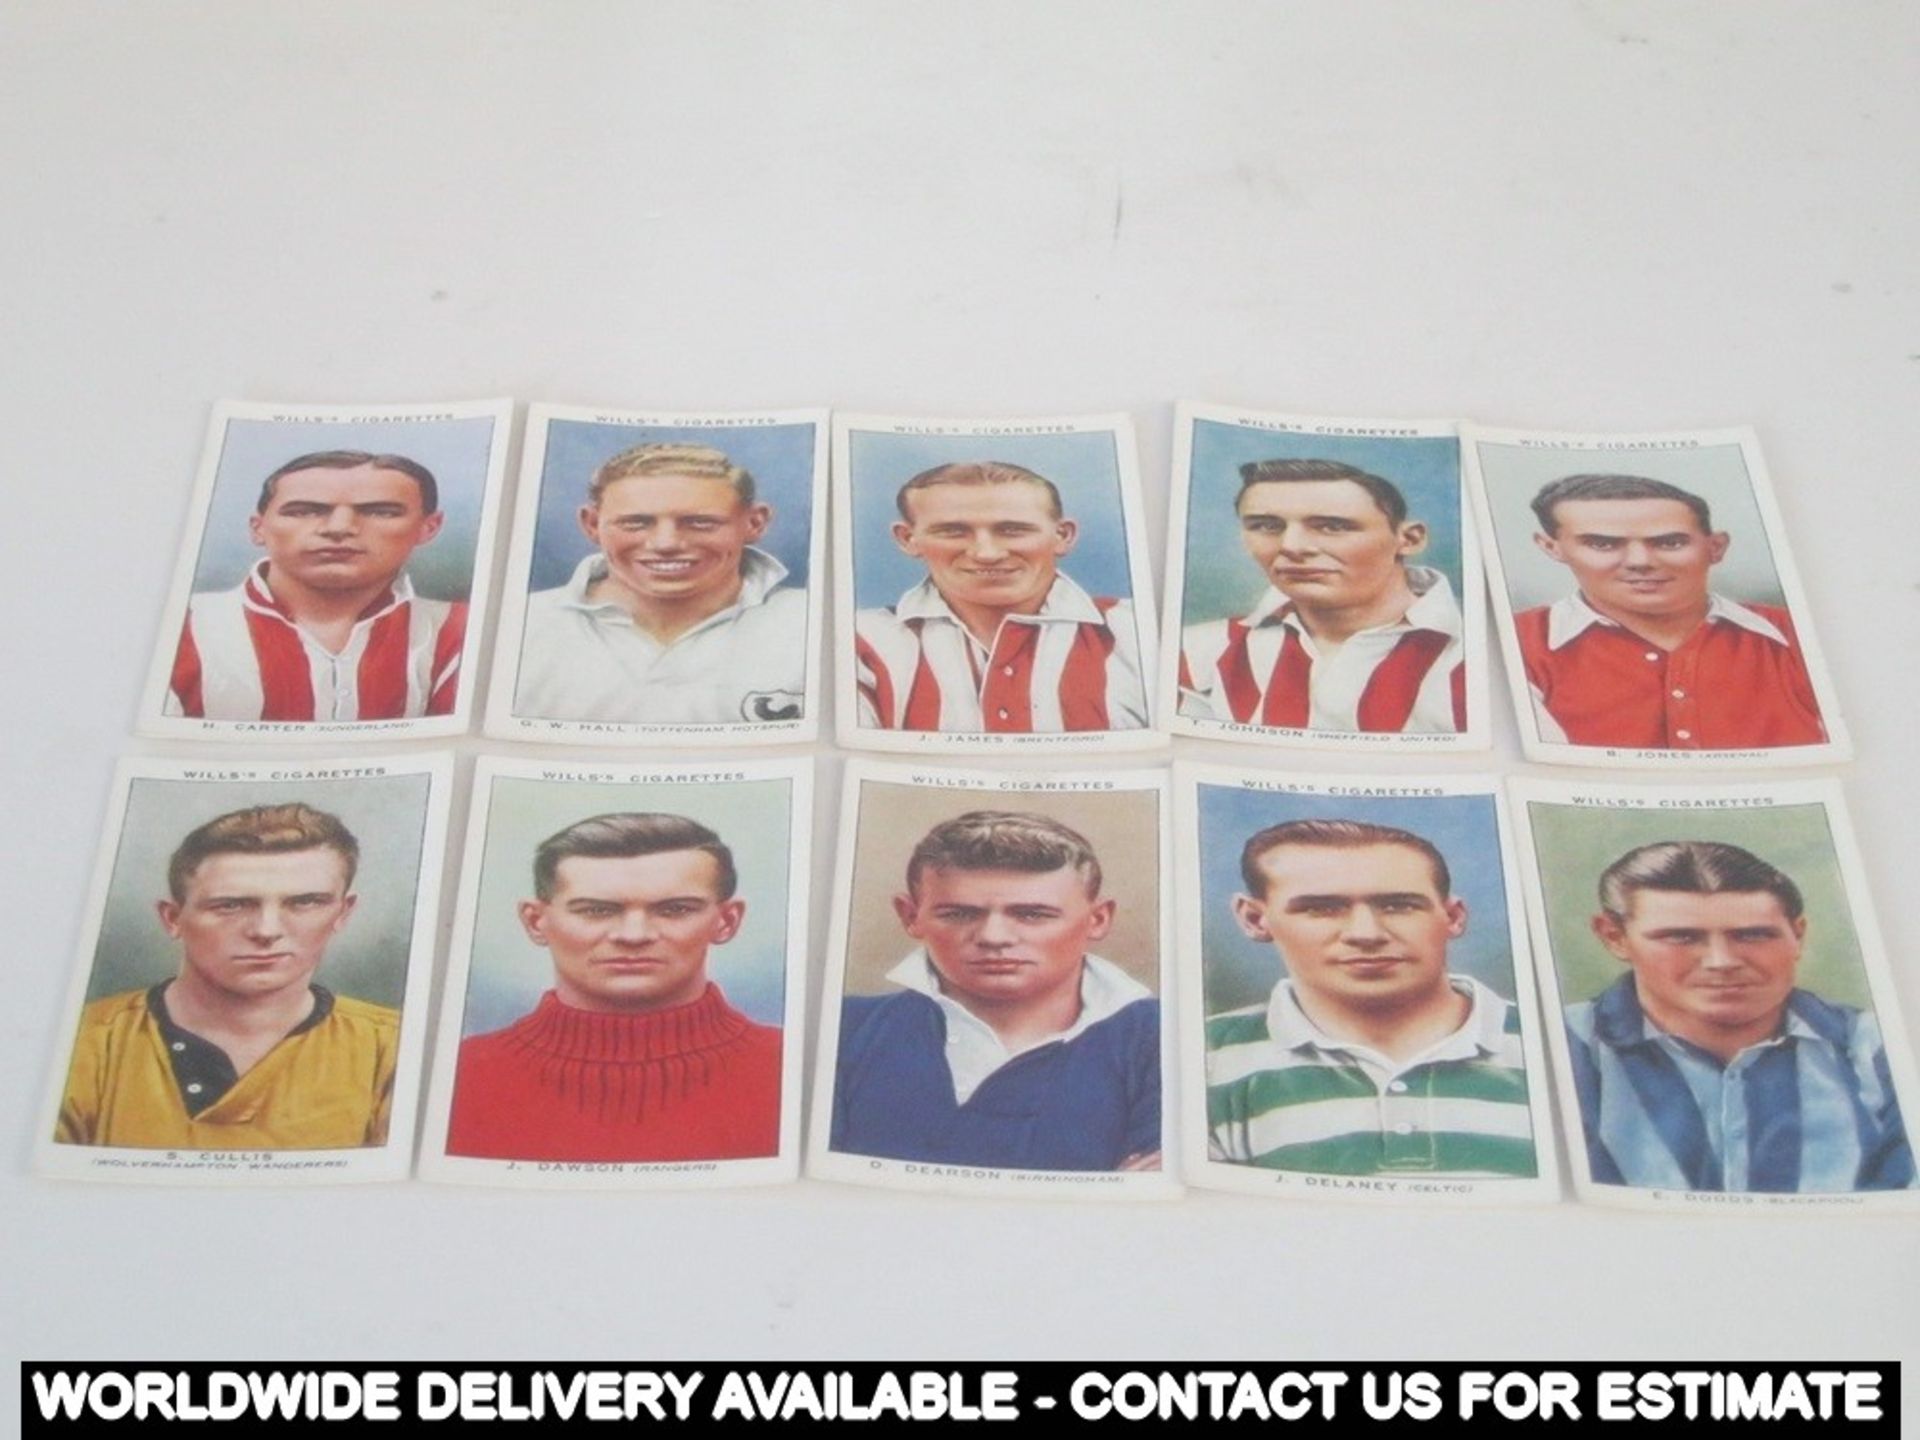 Box of 50 cigarette cards - Wild Woodbines - W D & H O Wills - Association Footballers - Image 5 of 9